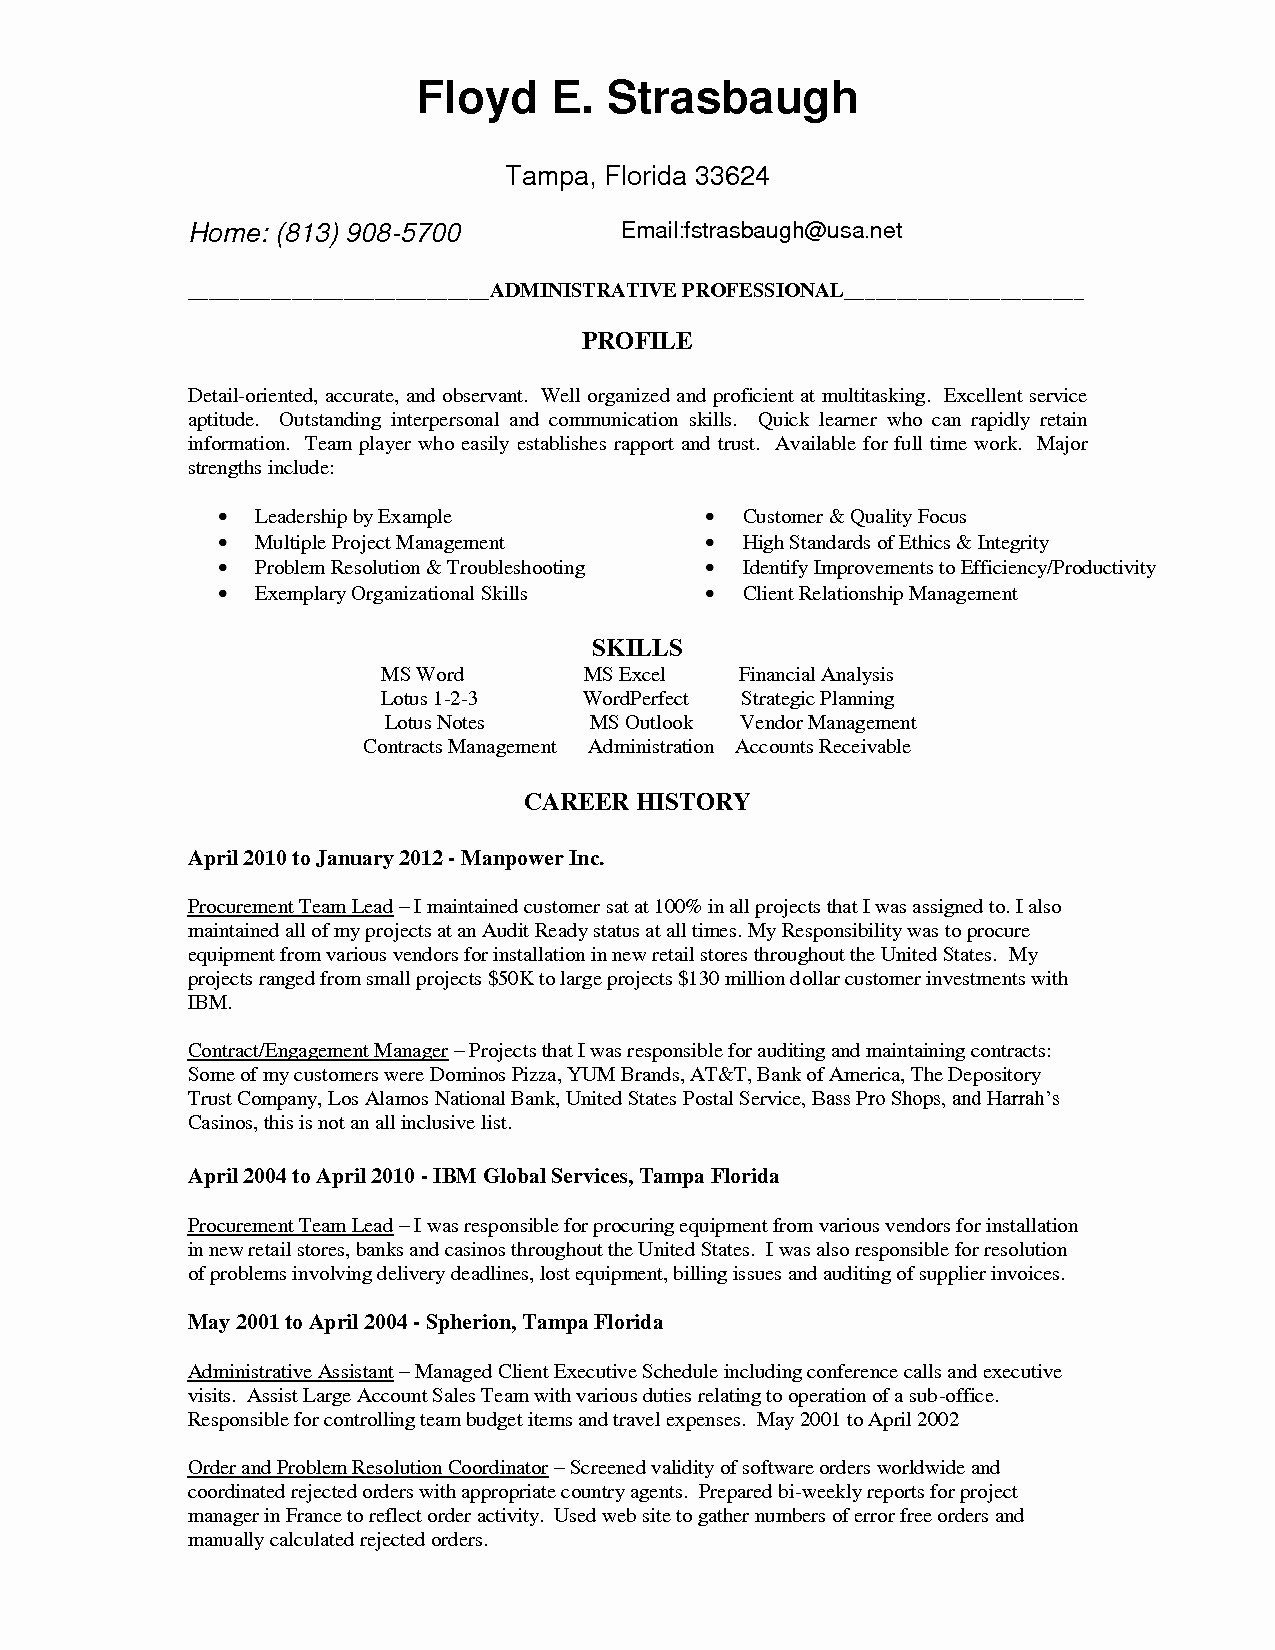 Letter to Creditors Template - Should You Bring A Cover Letter to A Job Fair